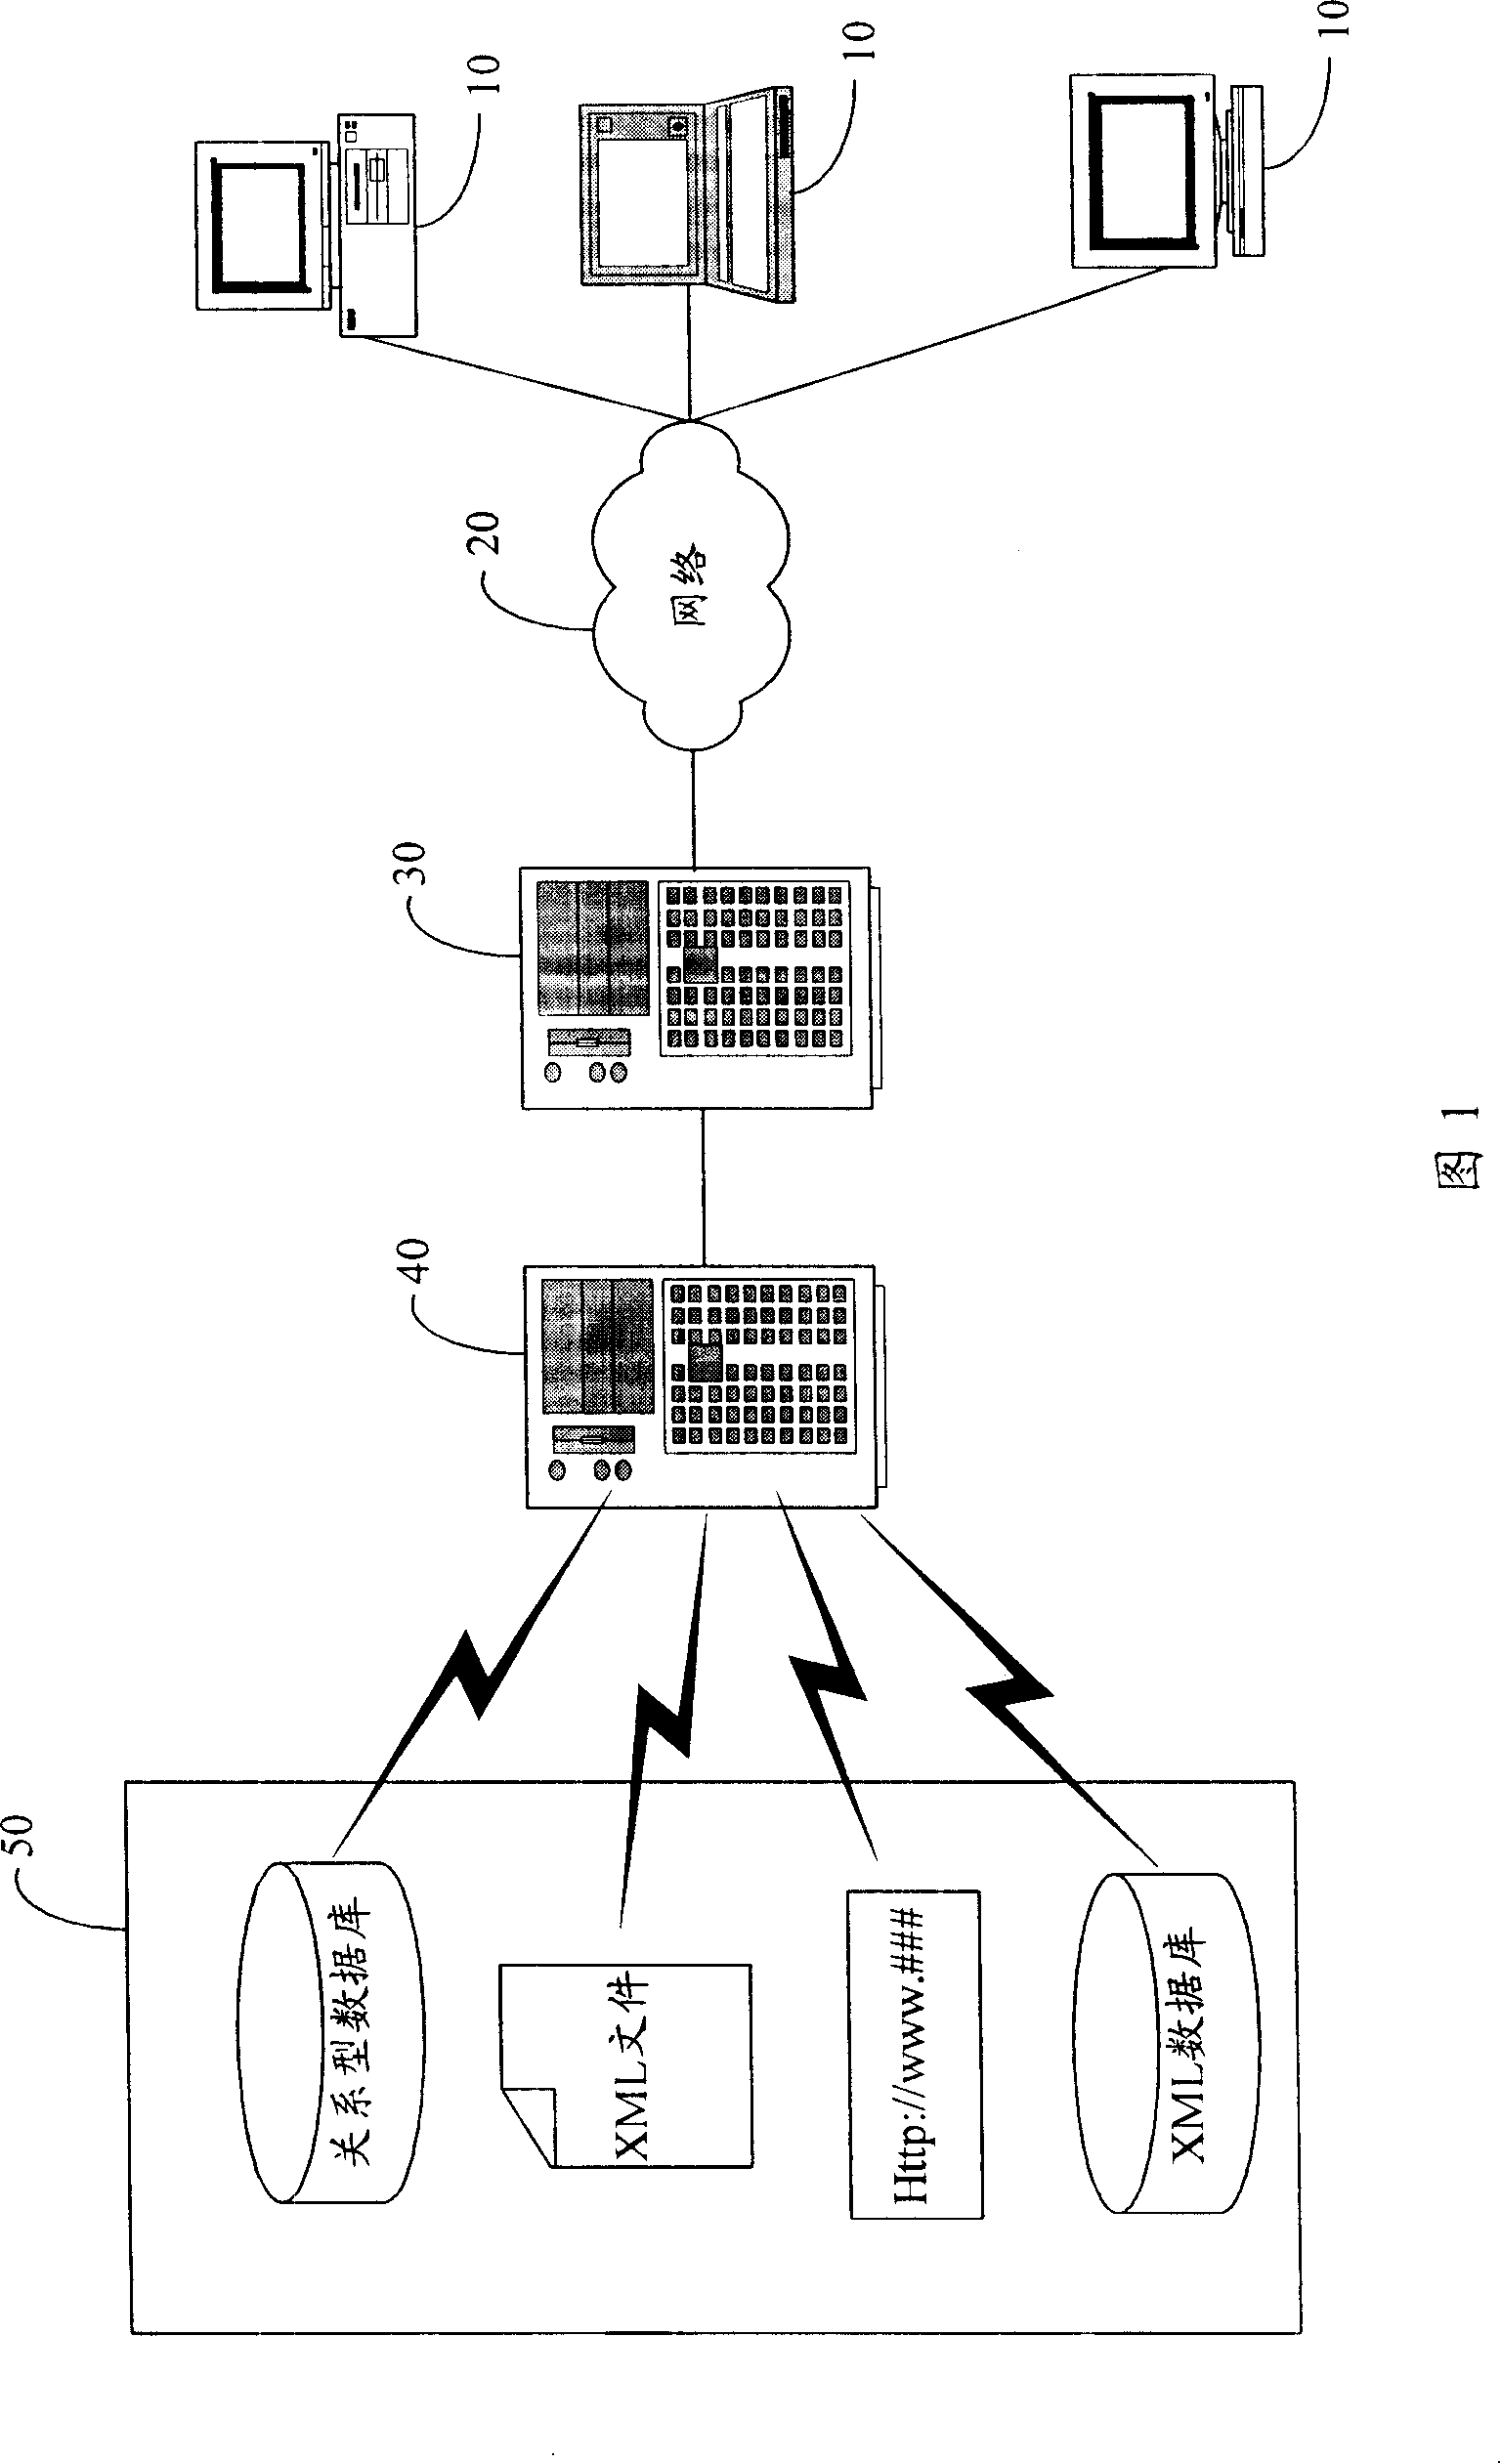 Network service generating system and method